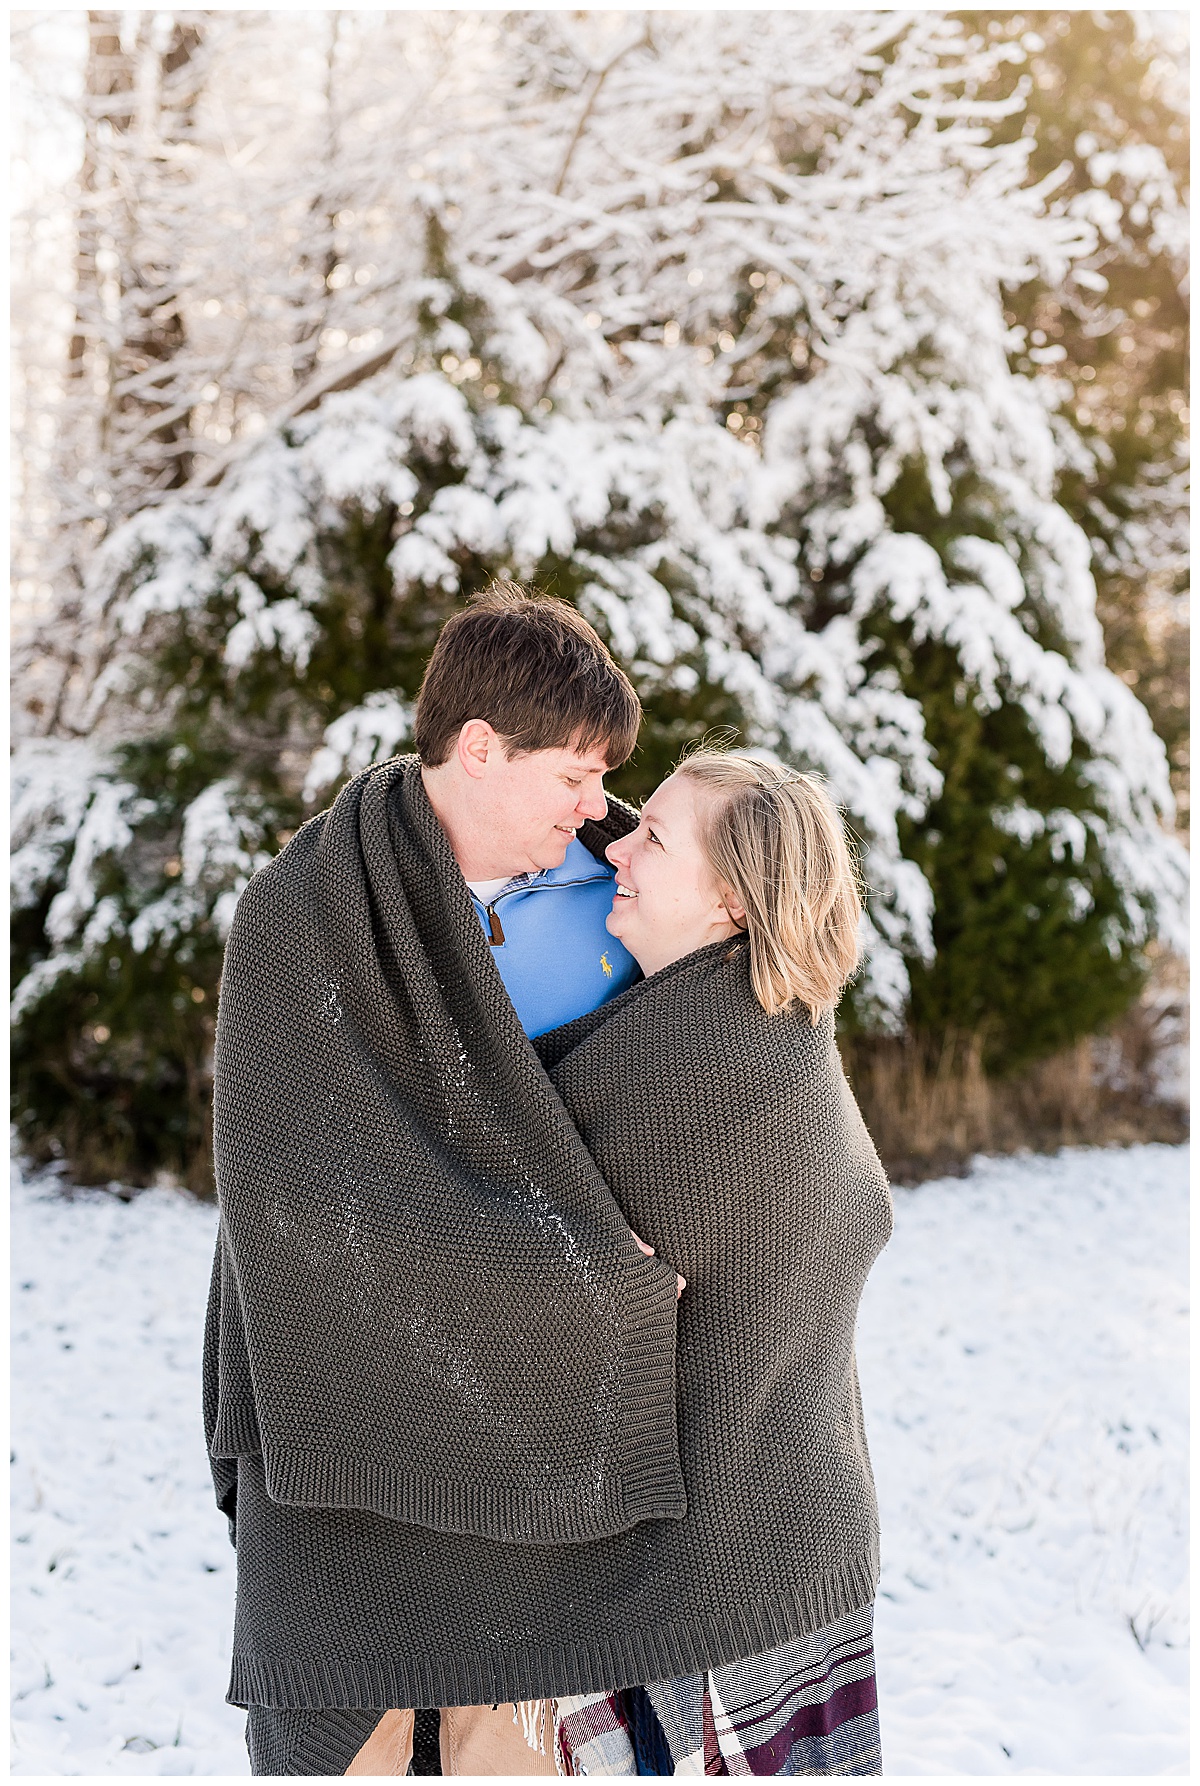 Winter Family Photos, Snow Family Photos, Family Photography, Winter Family Photoshoot, Caiti Garter Photography, Prince George Virginia Photographer, Old Navy Family Photo Outfits, Childrens Tulle Dresses, Snow Pictures, Family Snow Pictures